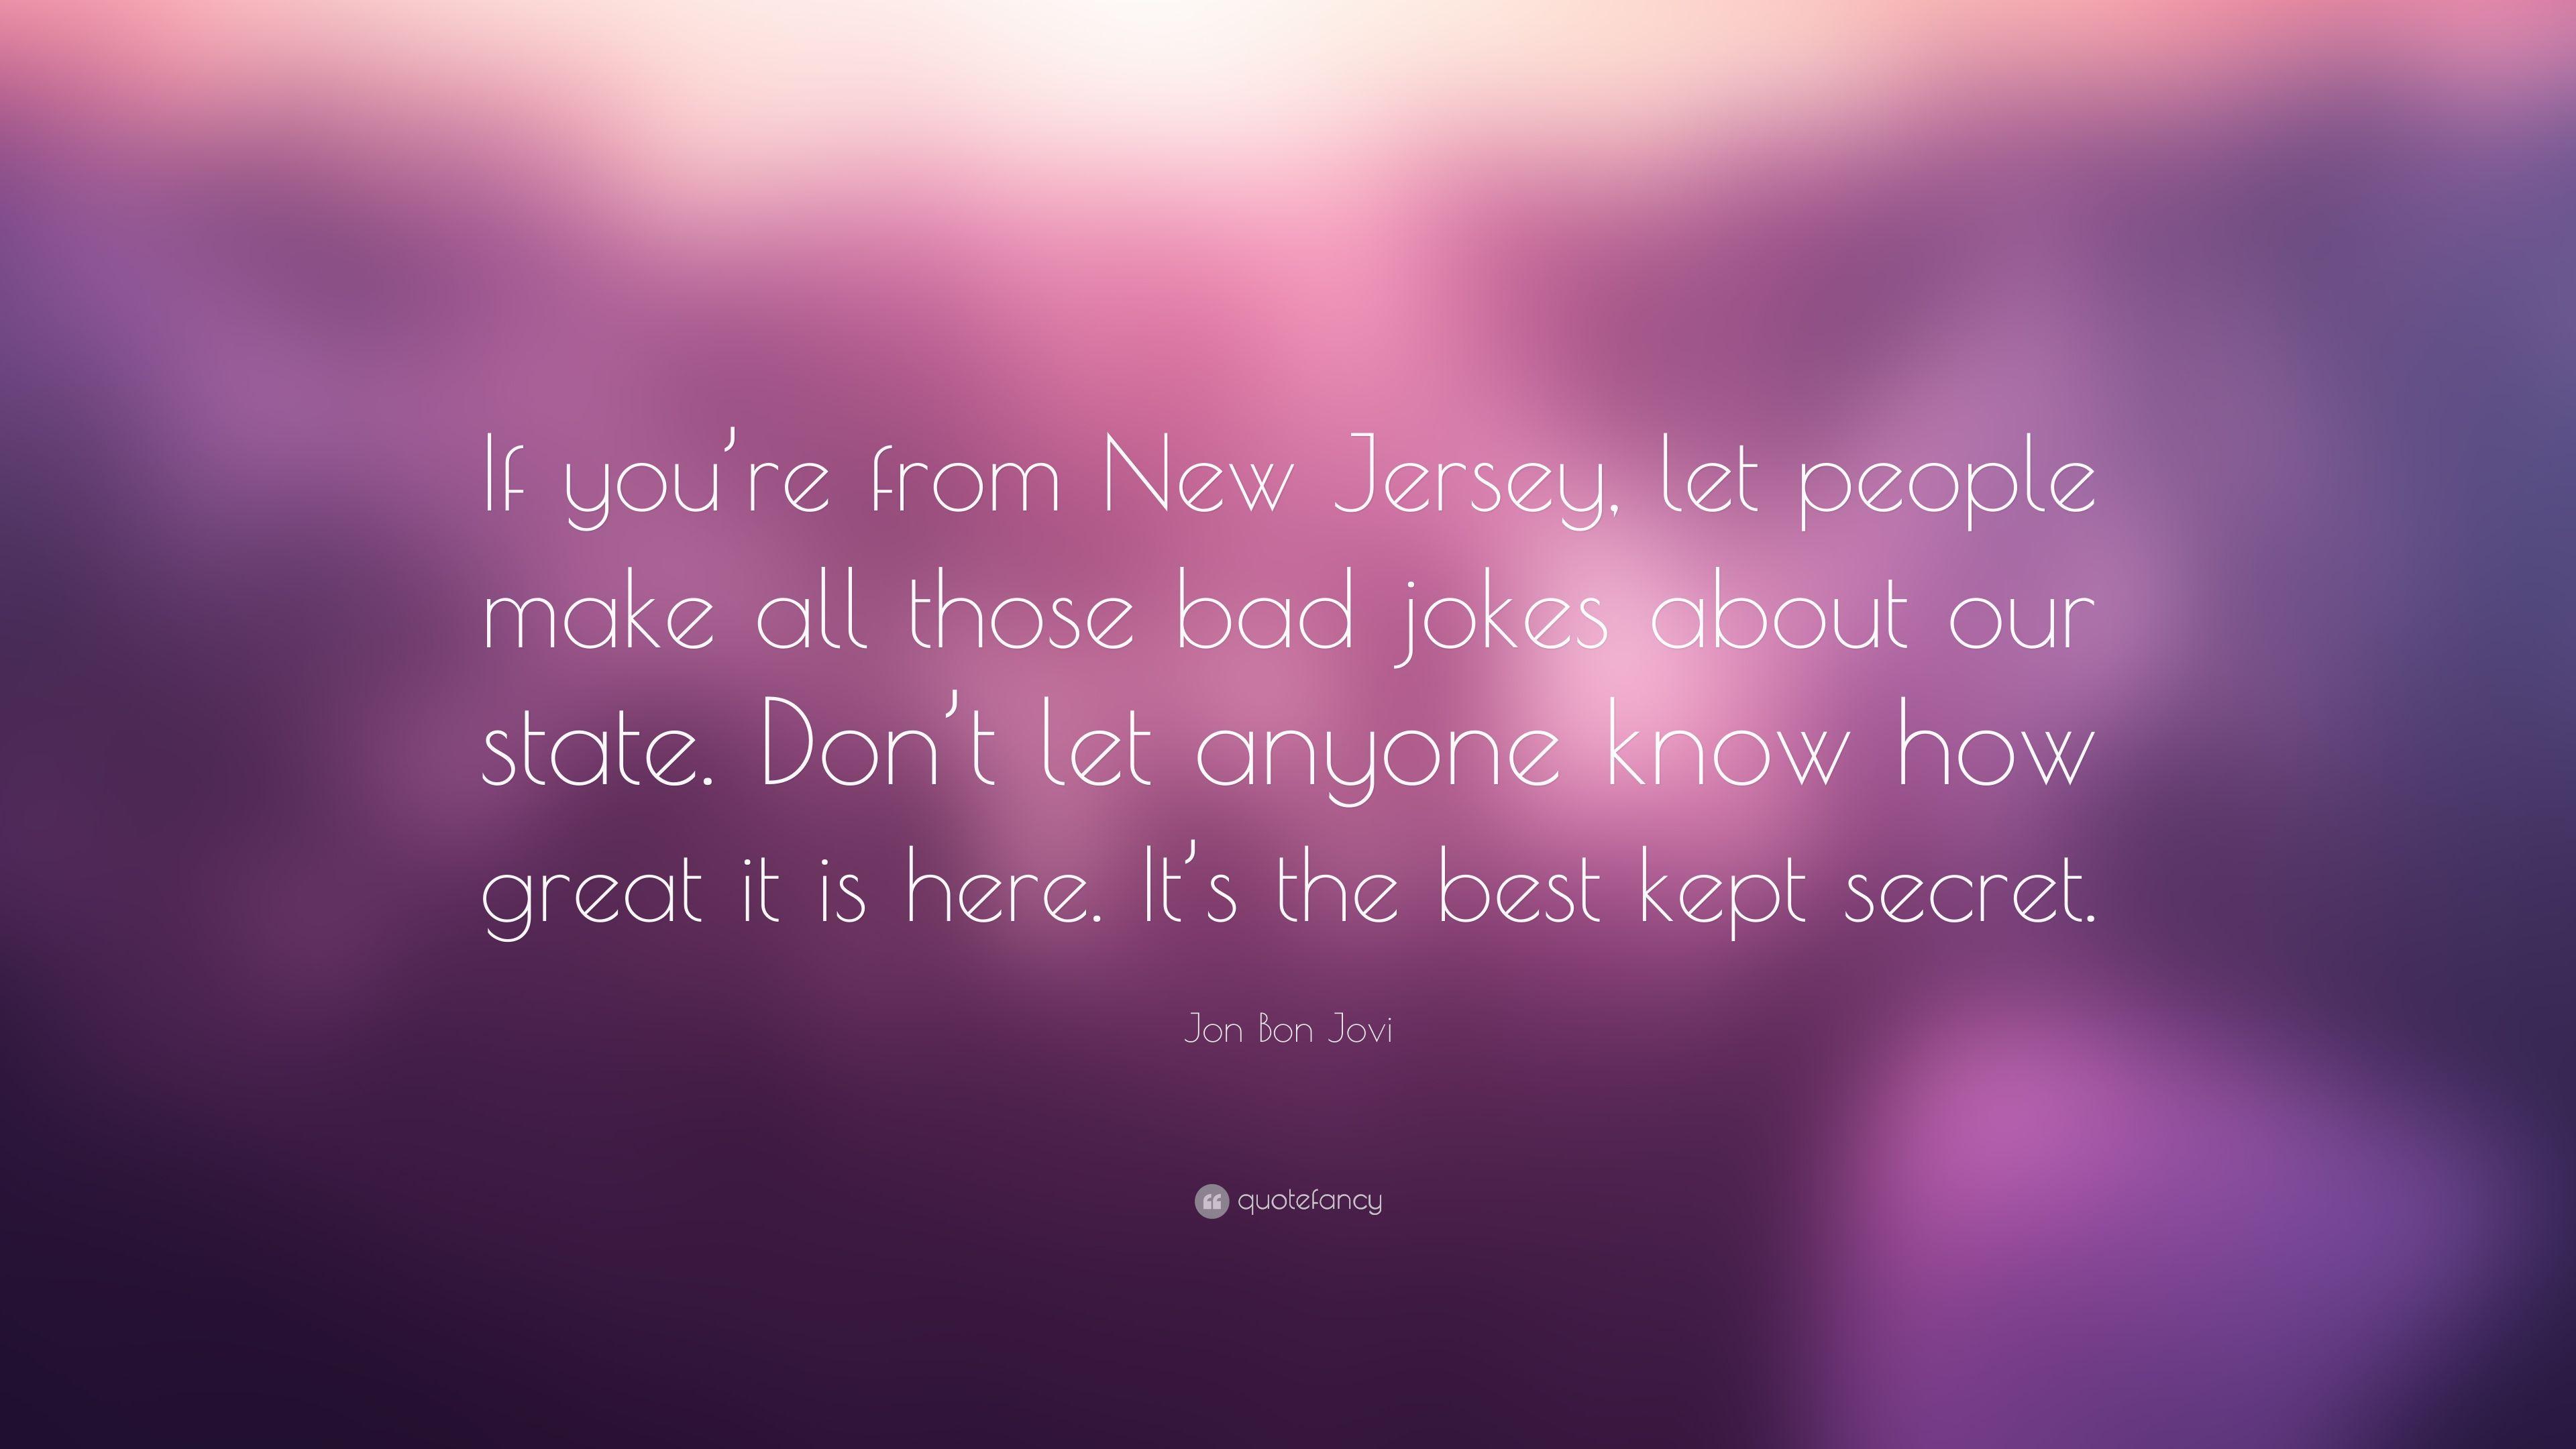 Jon Bon Jovi Quote: “If you're from New Jersey, let people make